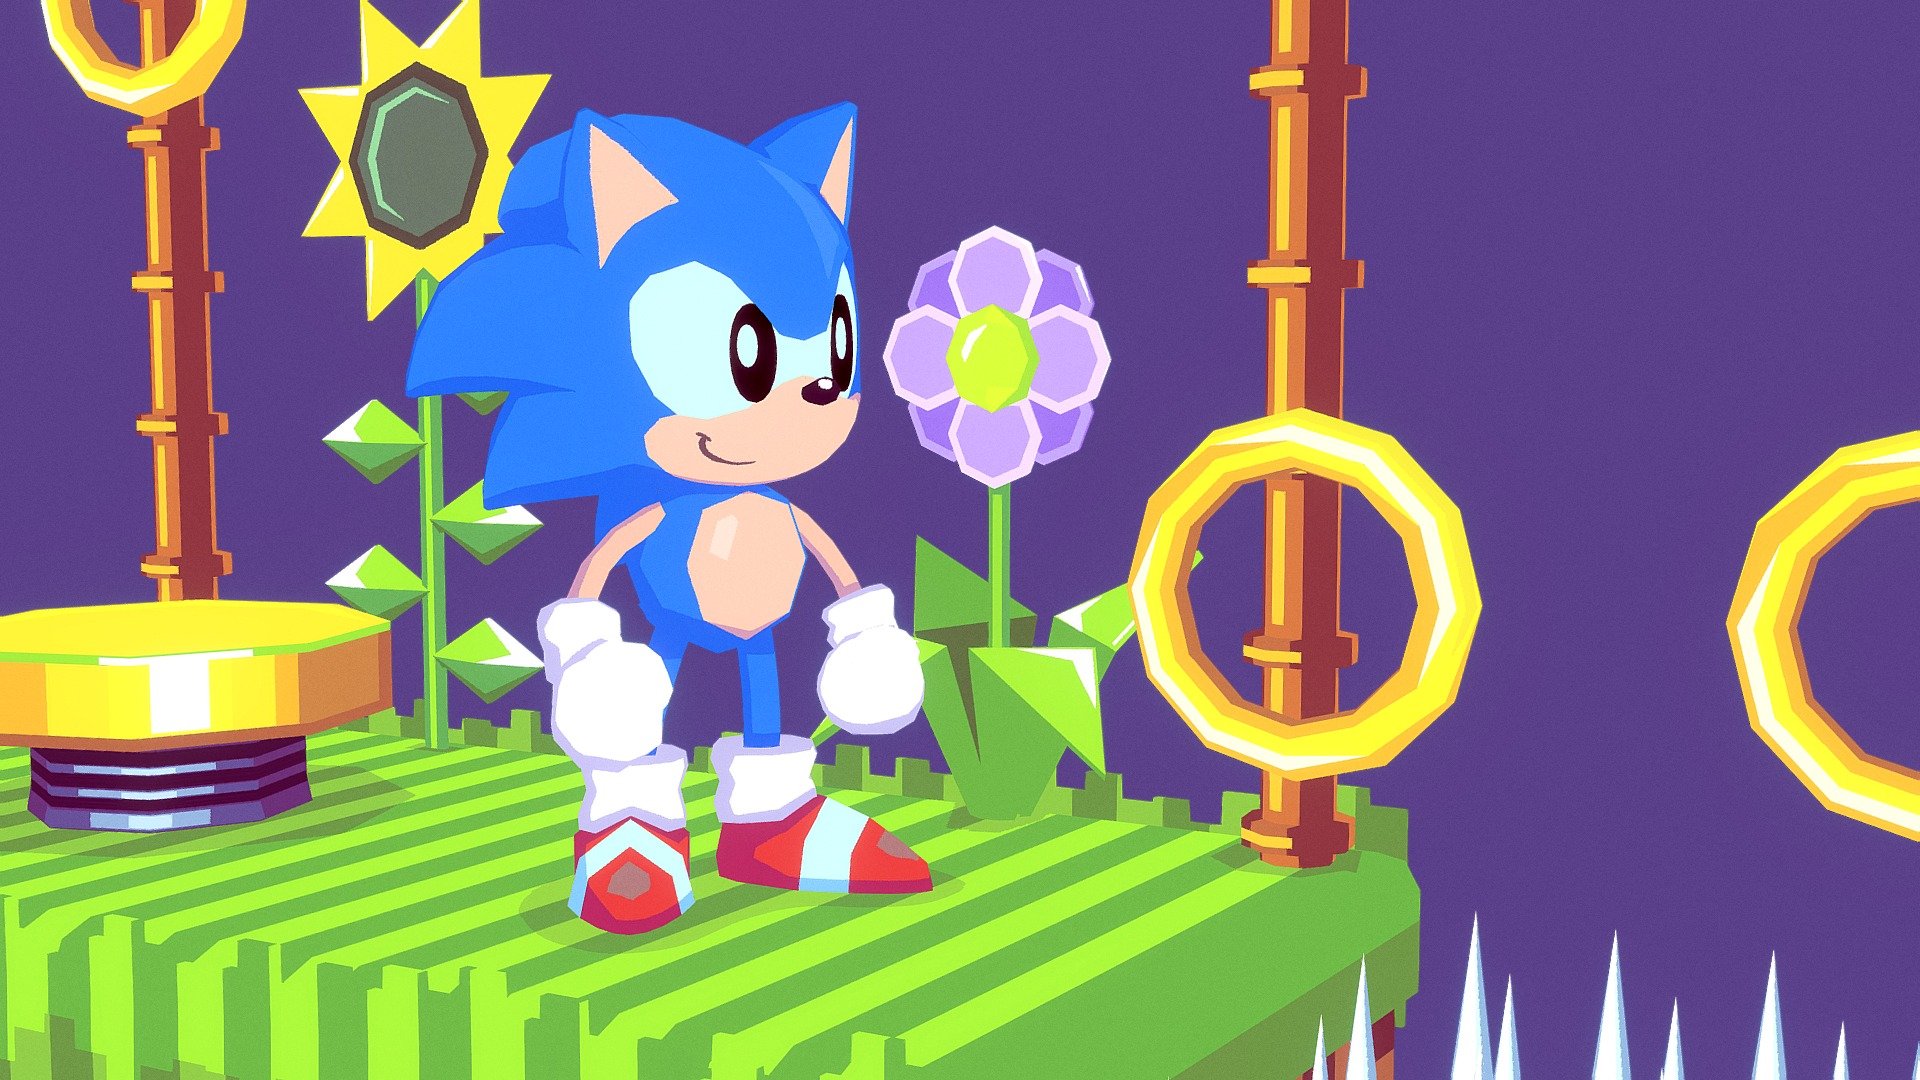 A little fanart of Sonic :)
Sonic The Hedgehog 1 was the very first game I remember playing as a kid.

Good times

Pixel version (https://www.deviantart.com/albazcythe/art/Sonic-Color-Remix-889007880):

 - Sonic - 3D model by zcythe 3d model